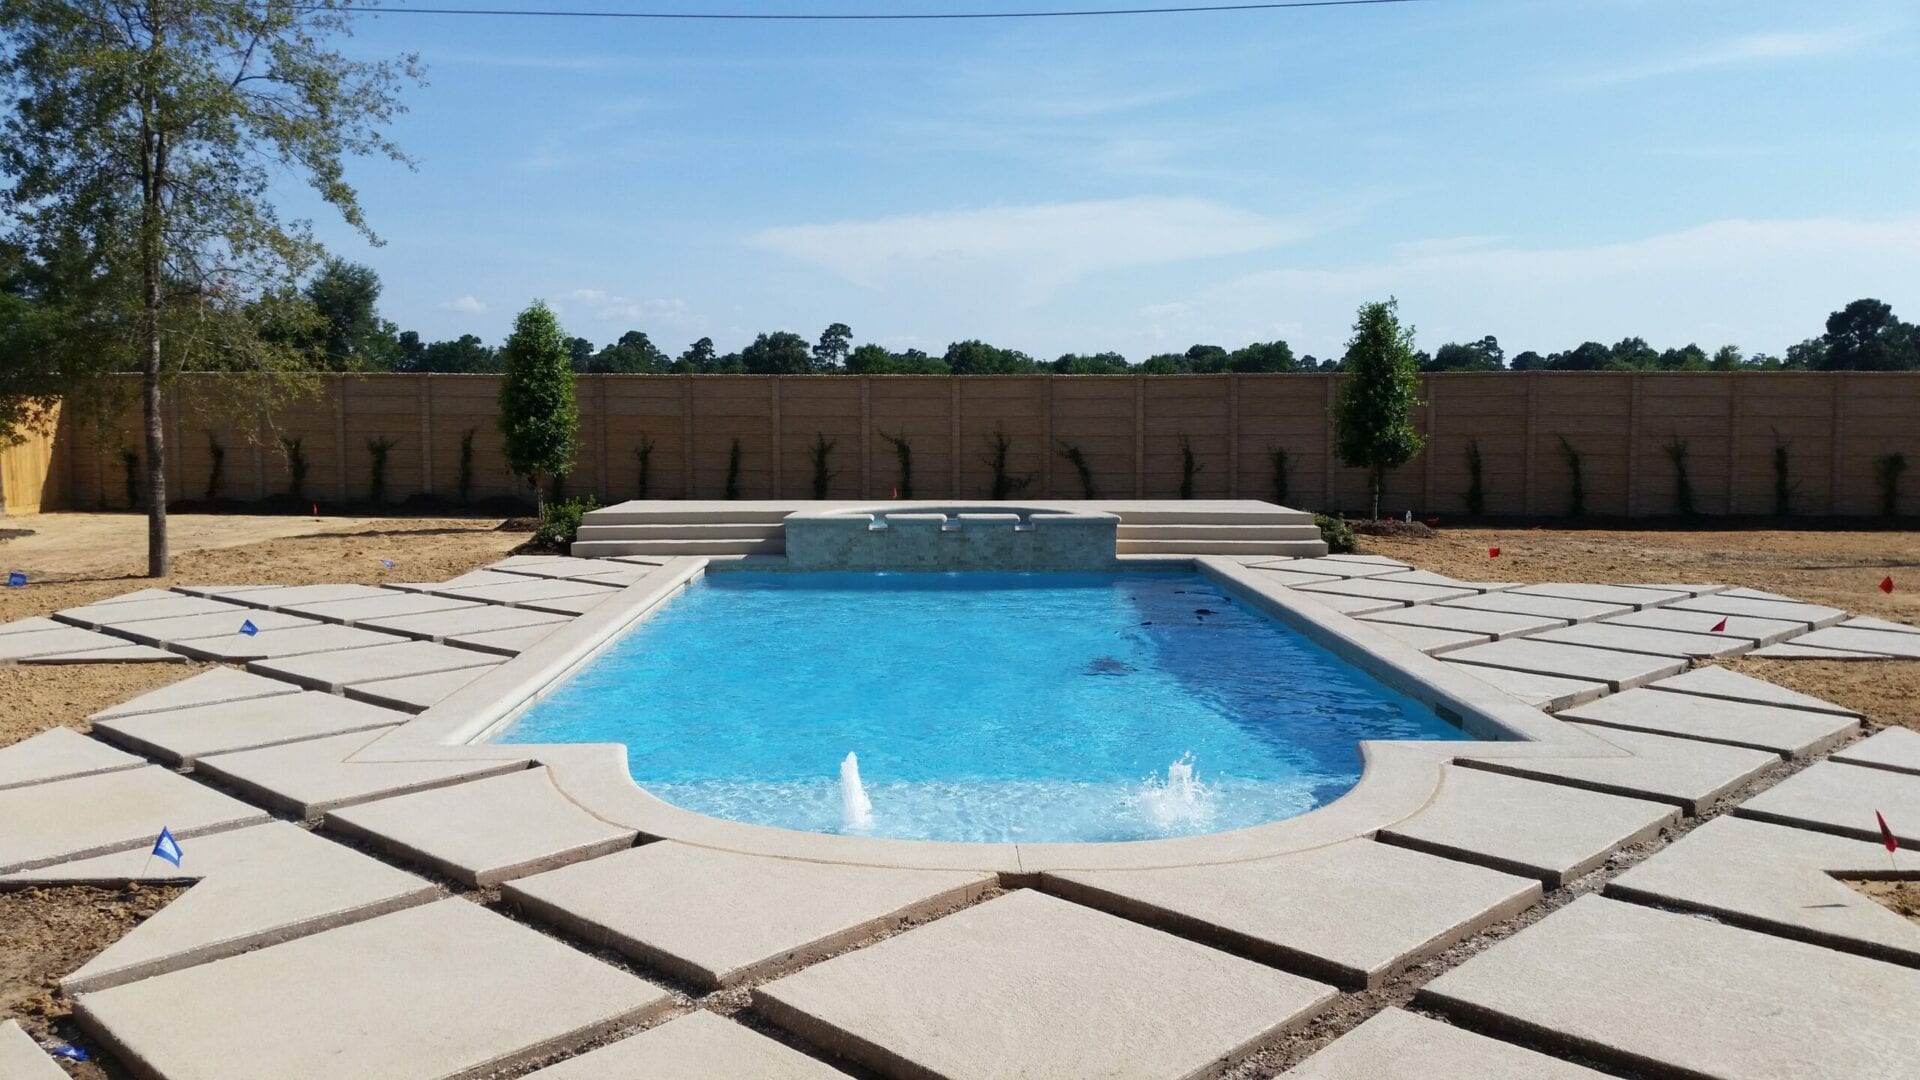 A swimming pool with a large concrete slab.